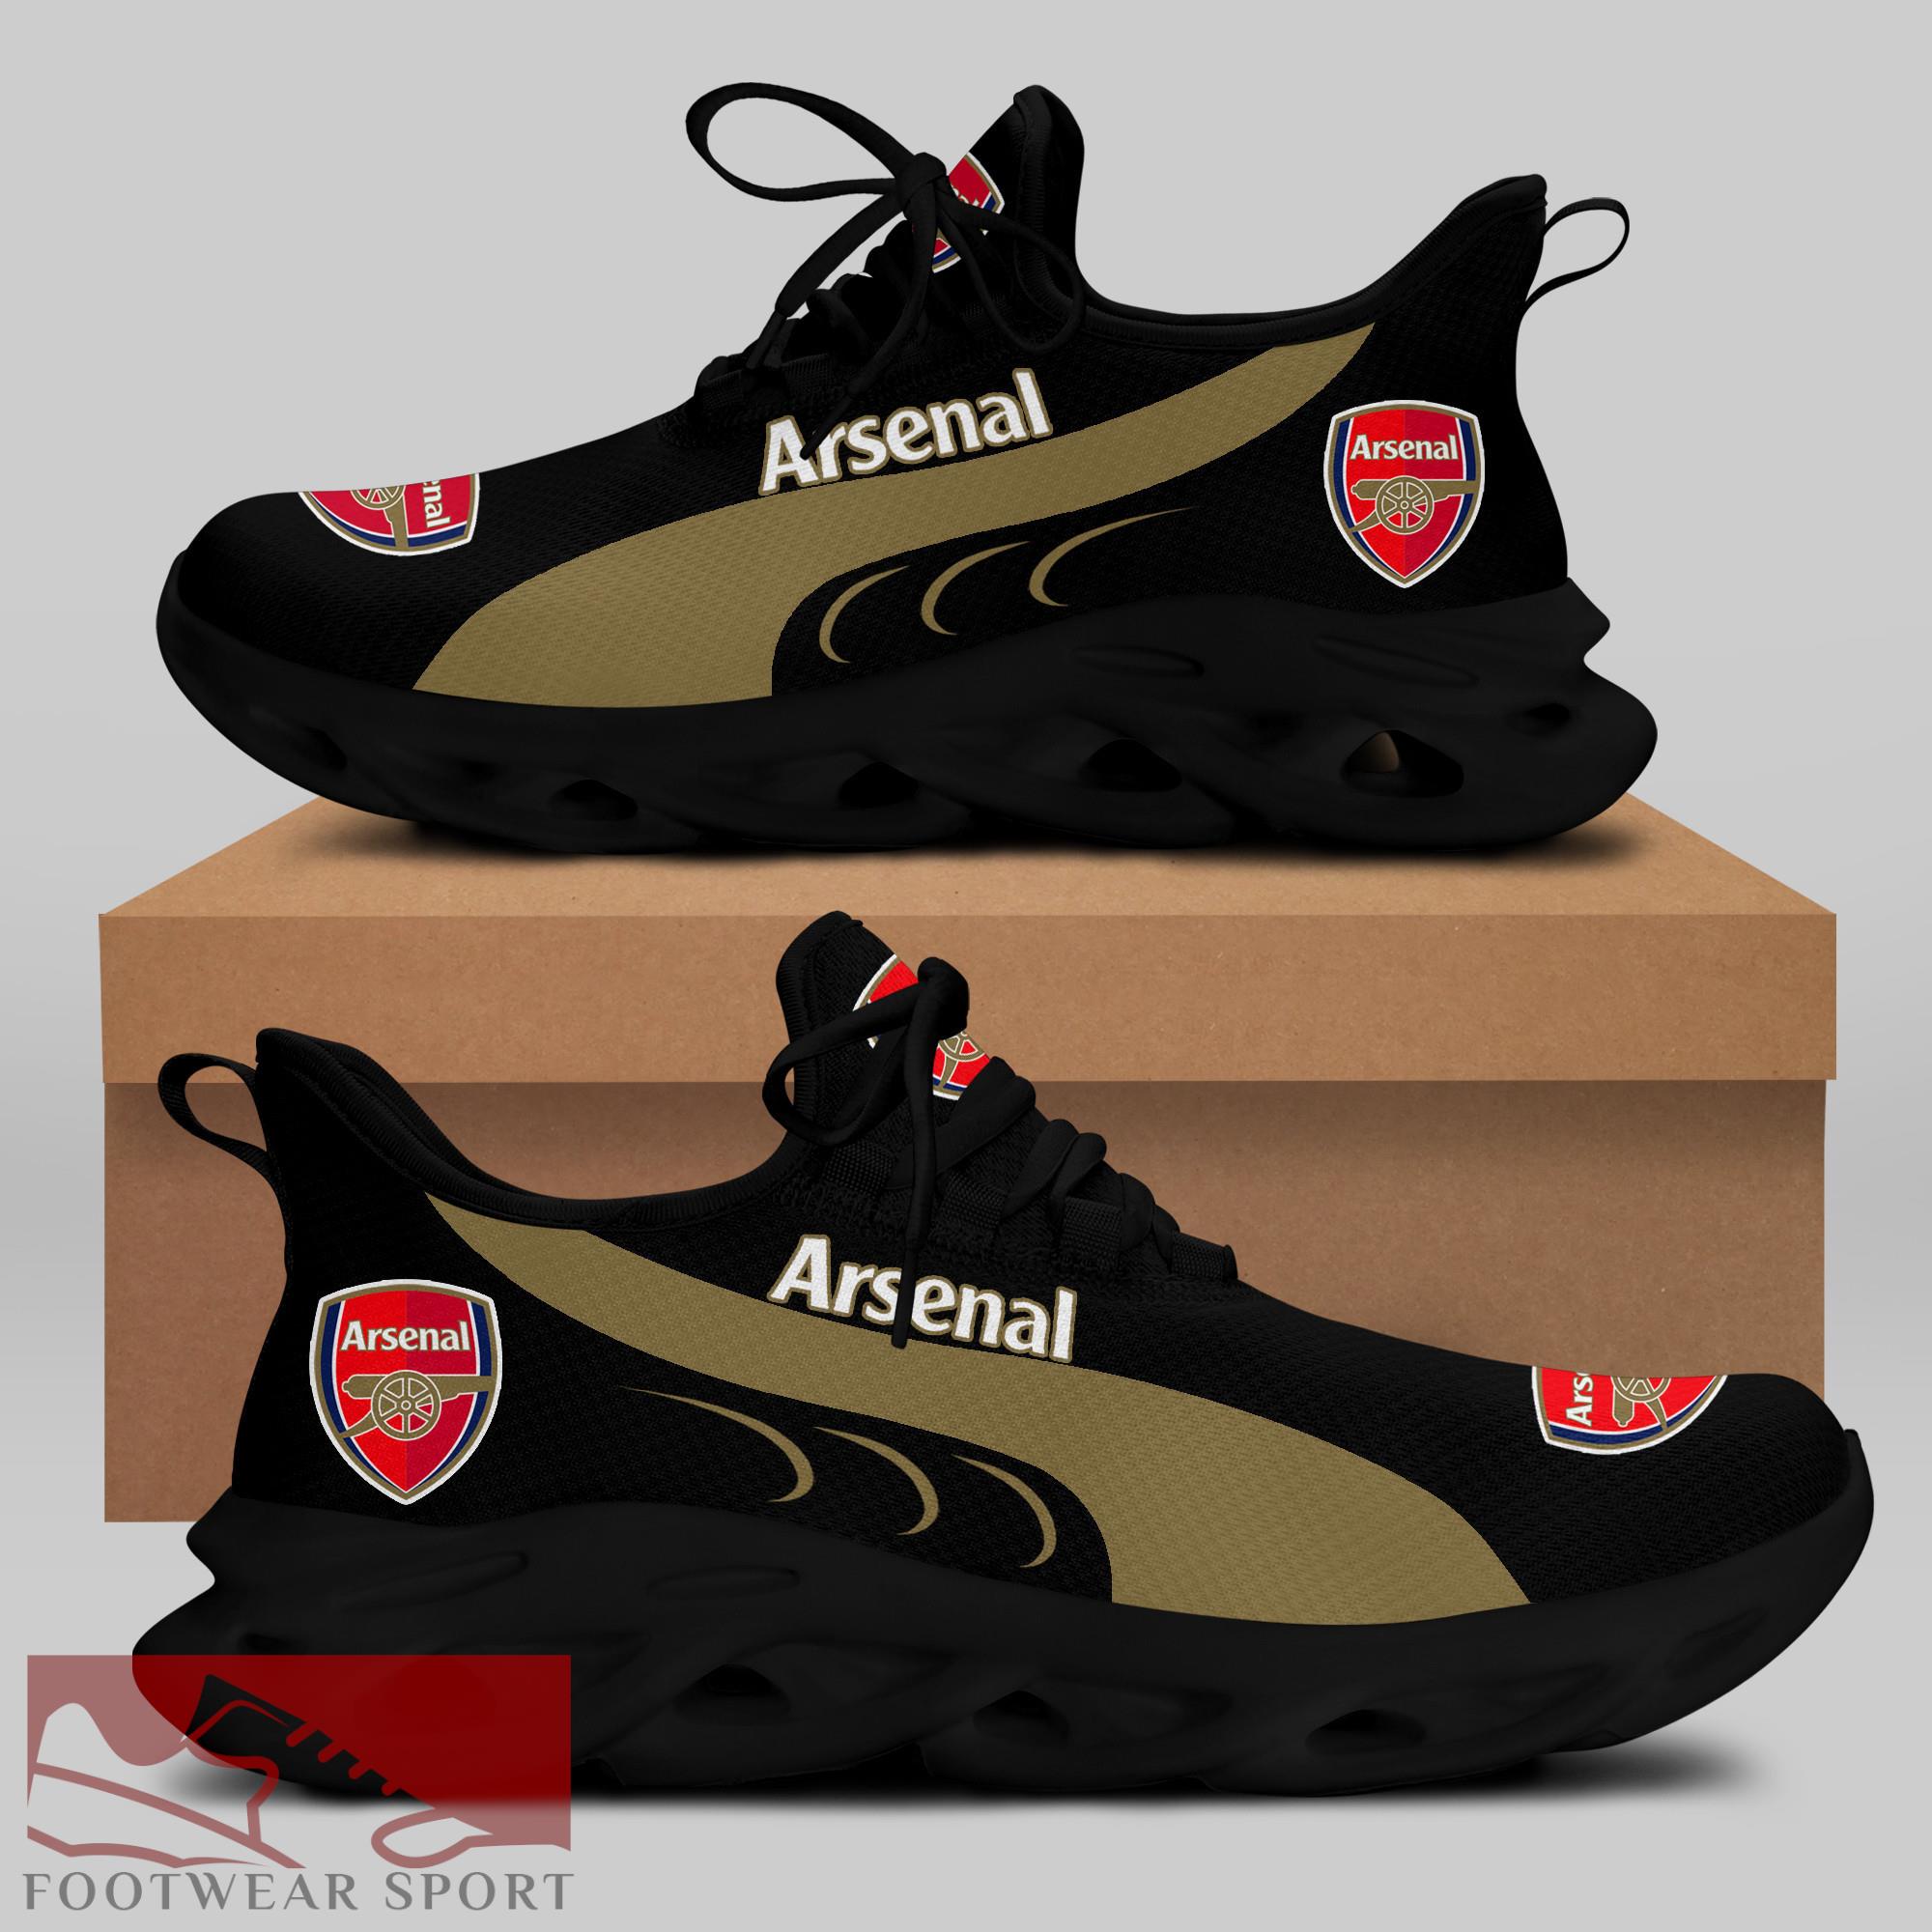 Arsenal Fans EPL Chunky Sneakers Trendsetting Max Soul Shoes For Men And Women - Arsenal Chunky Sneakers White Black Max Soul Shoes For Men And Women Photo 1